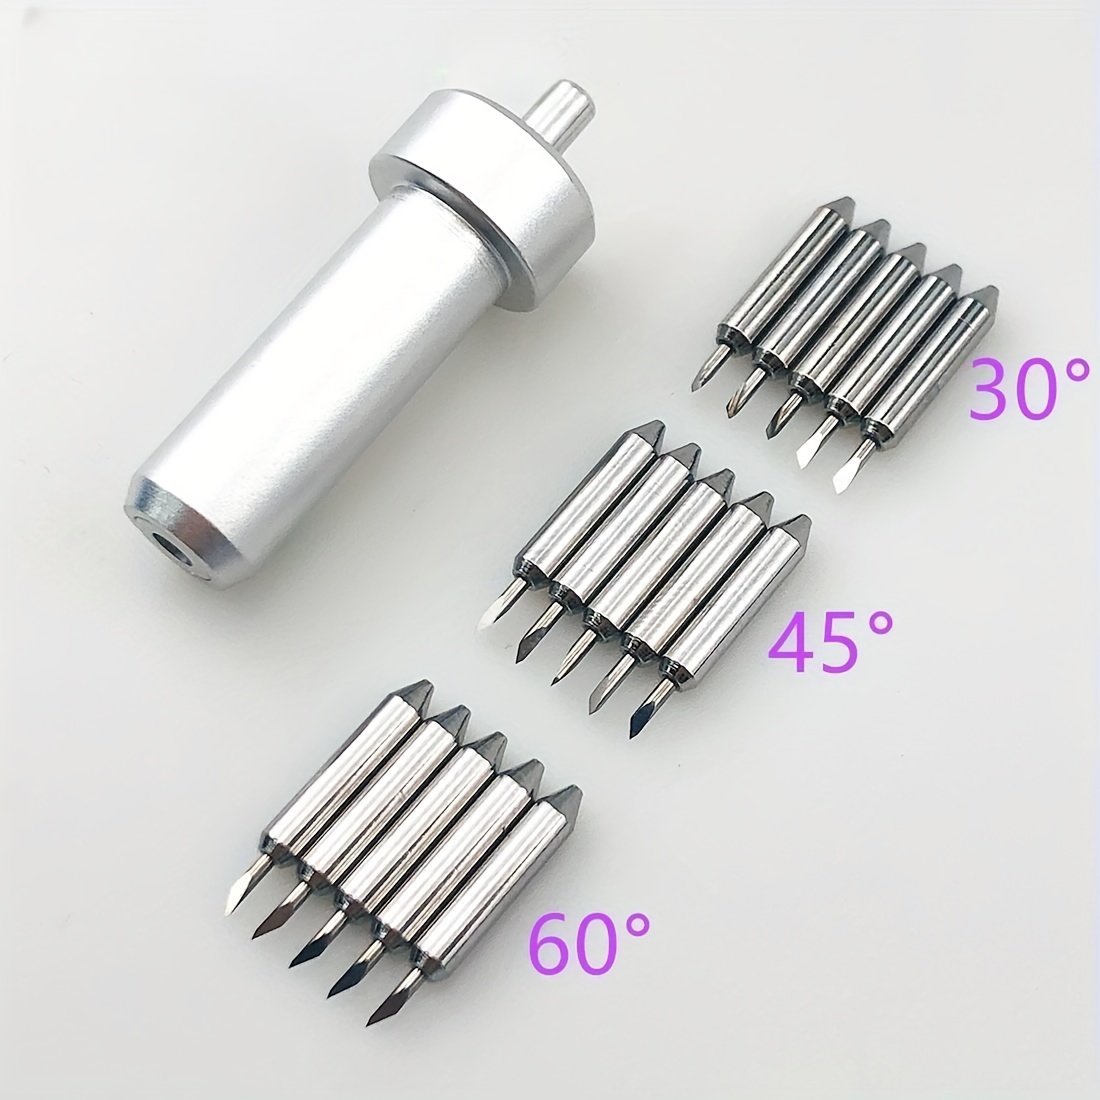 

30/45/60 Degree Cutting Blades For Joy Cutting Blades+joy Blade Holder And Housing, 30° (bonded-fabric Blade)/ 45°(deep-point Blade)/ 60°(fine-point Blade), Replacement Blades, Joy, Silver